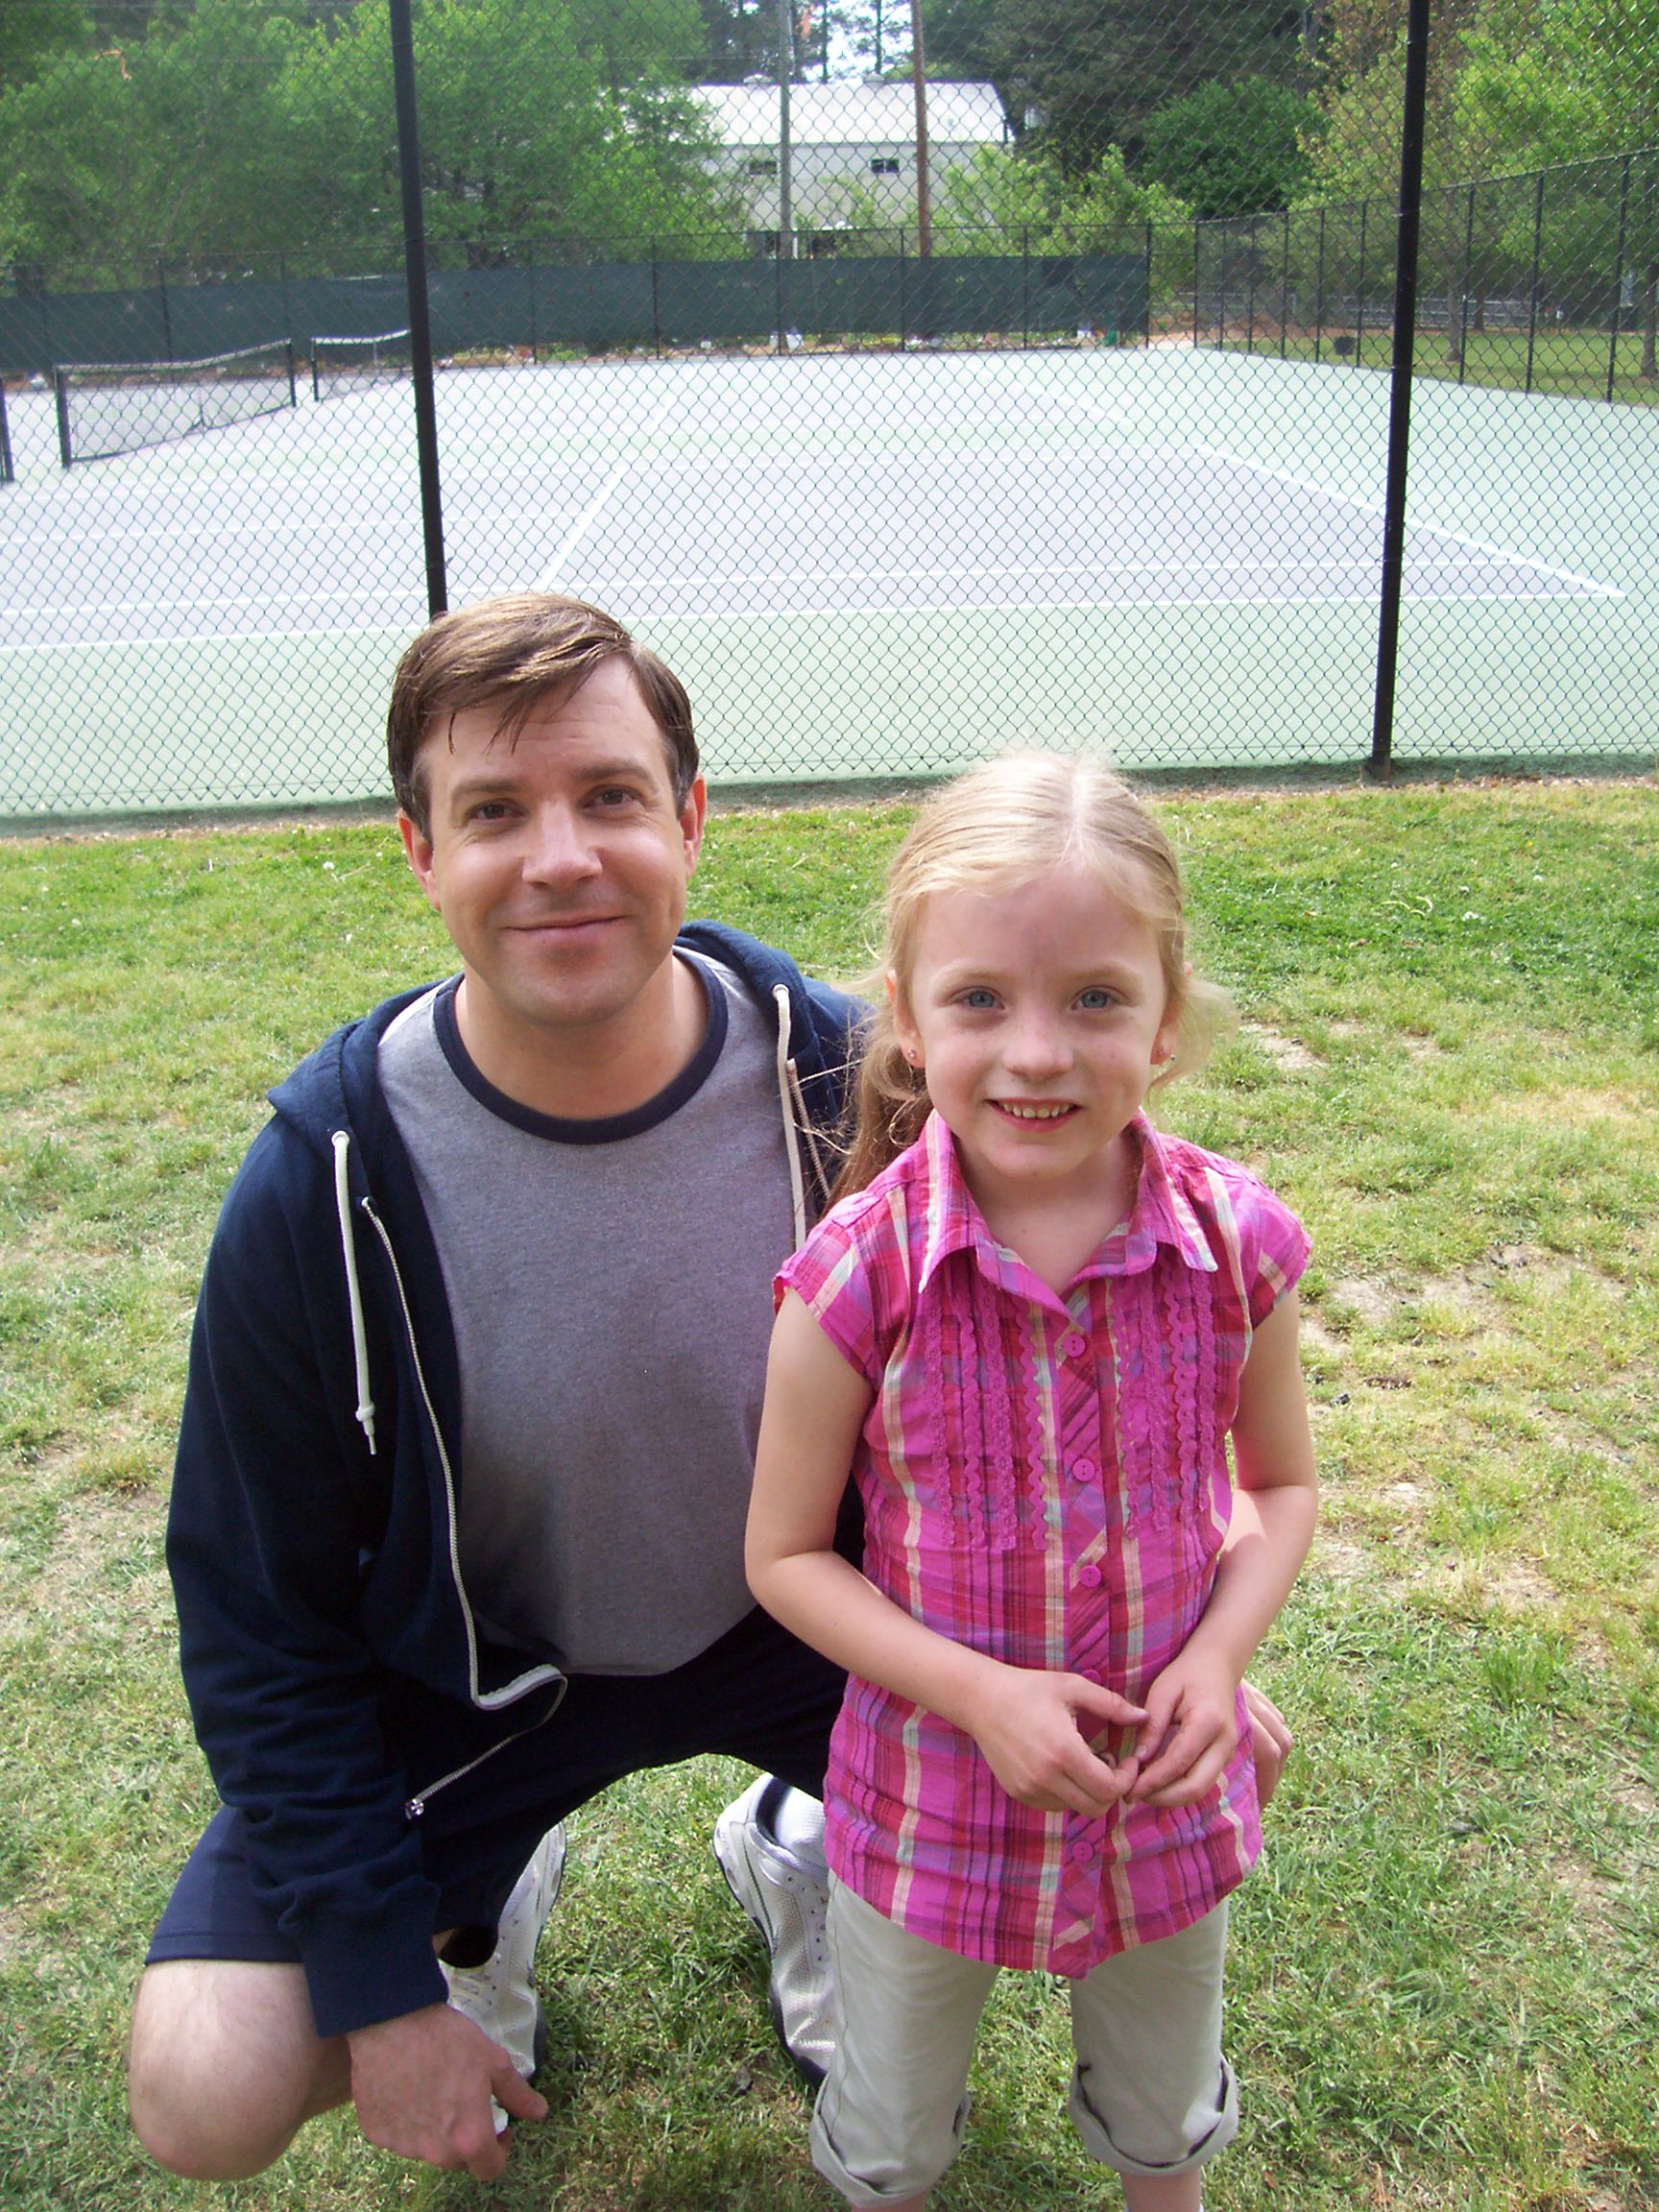 Christa Beth Campbell with Jason Sudeikis on set!